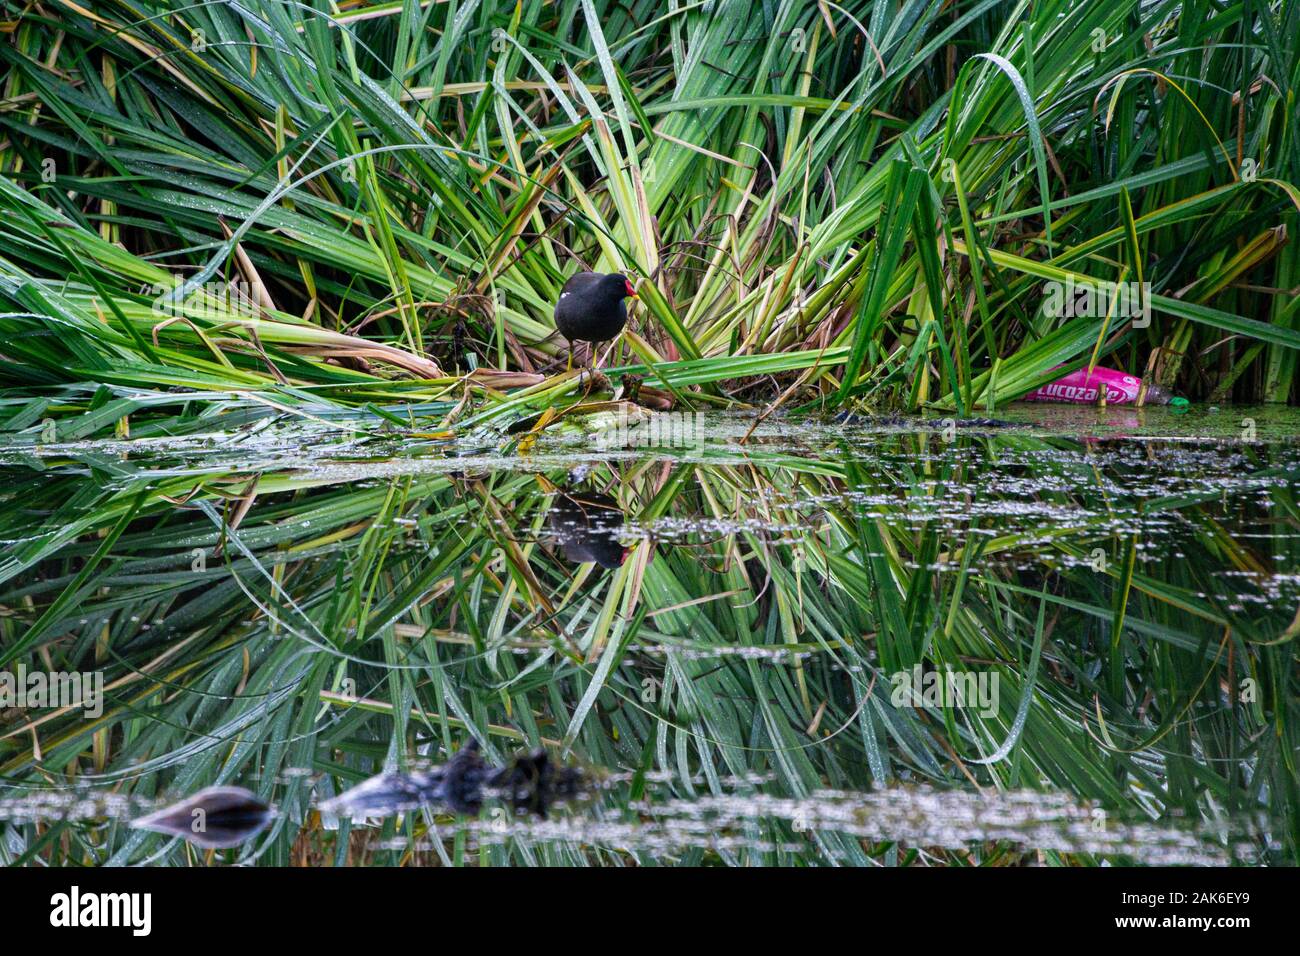 A moorhen (Gallinula chloropus) by the edge of a lake, reflected in the water Stock Photo